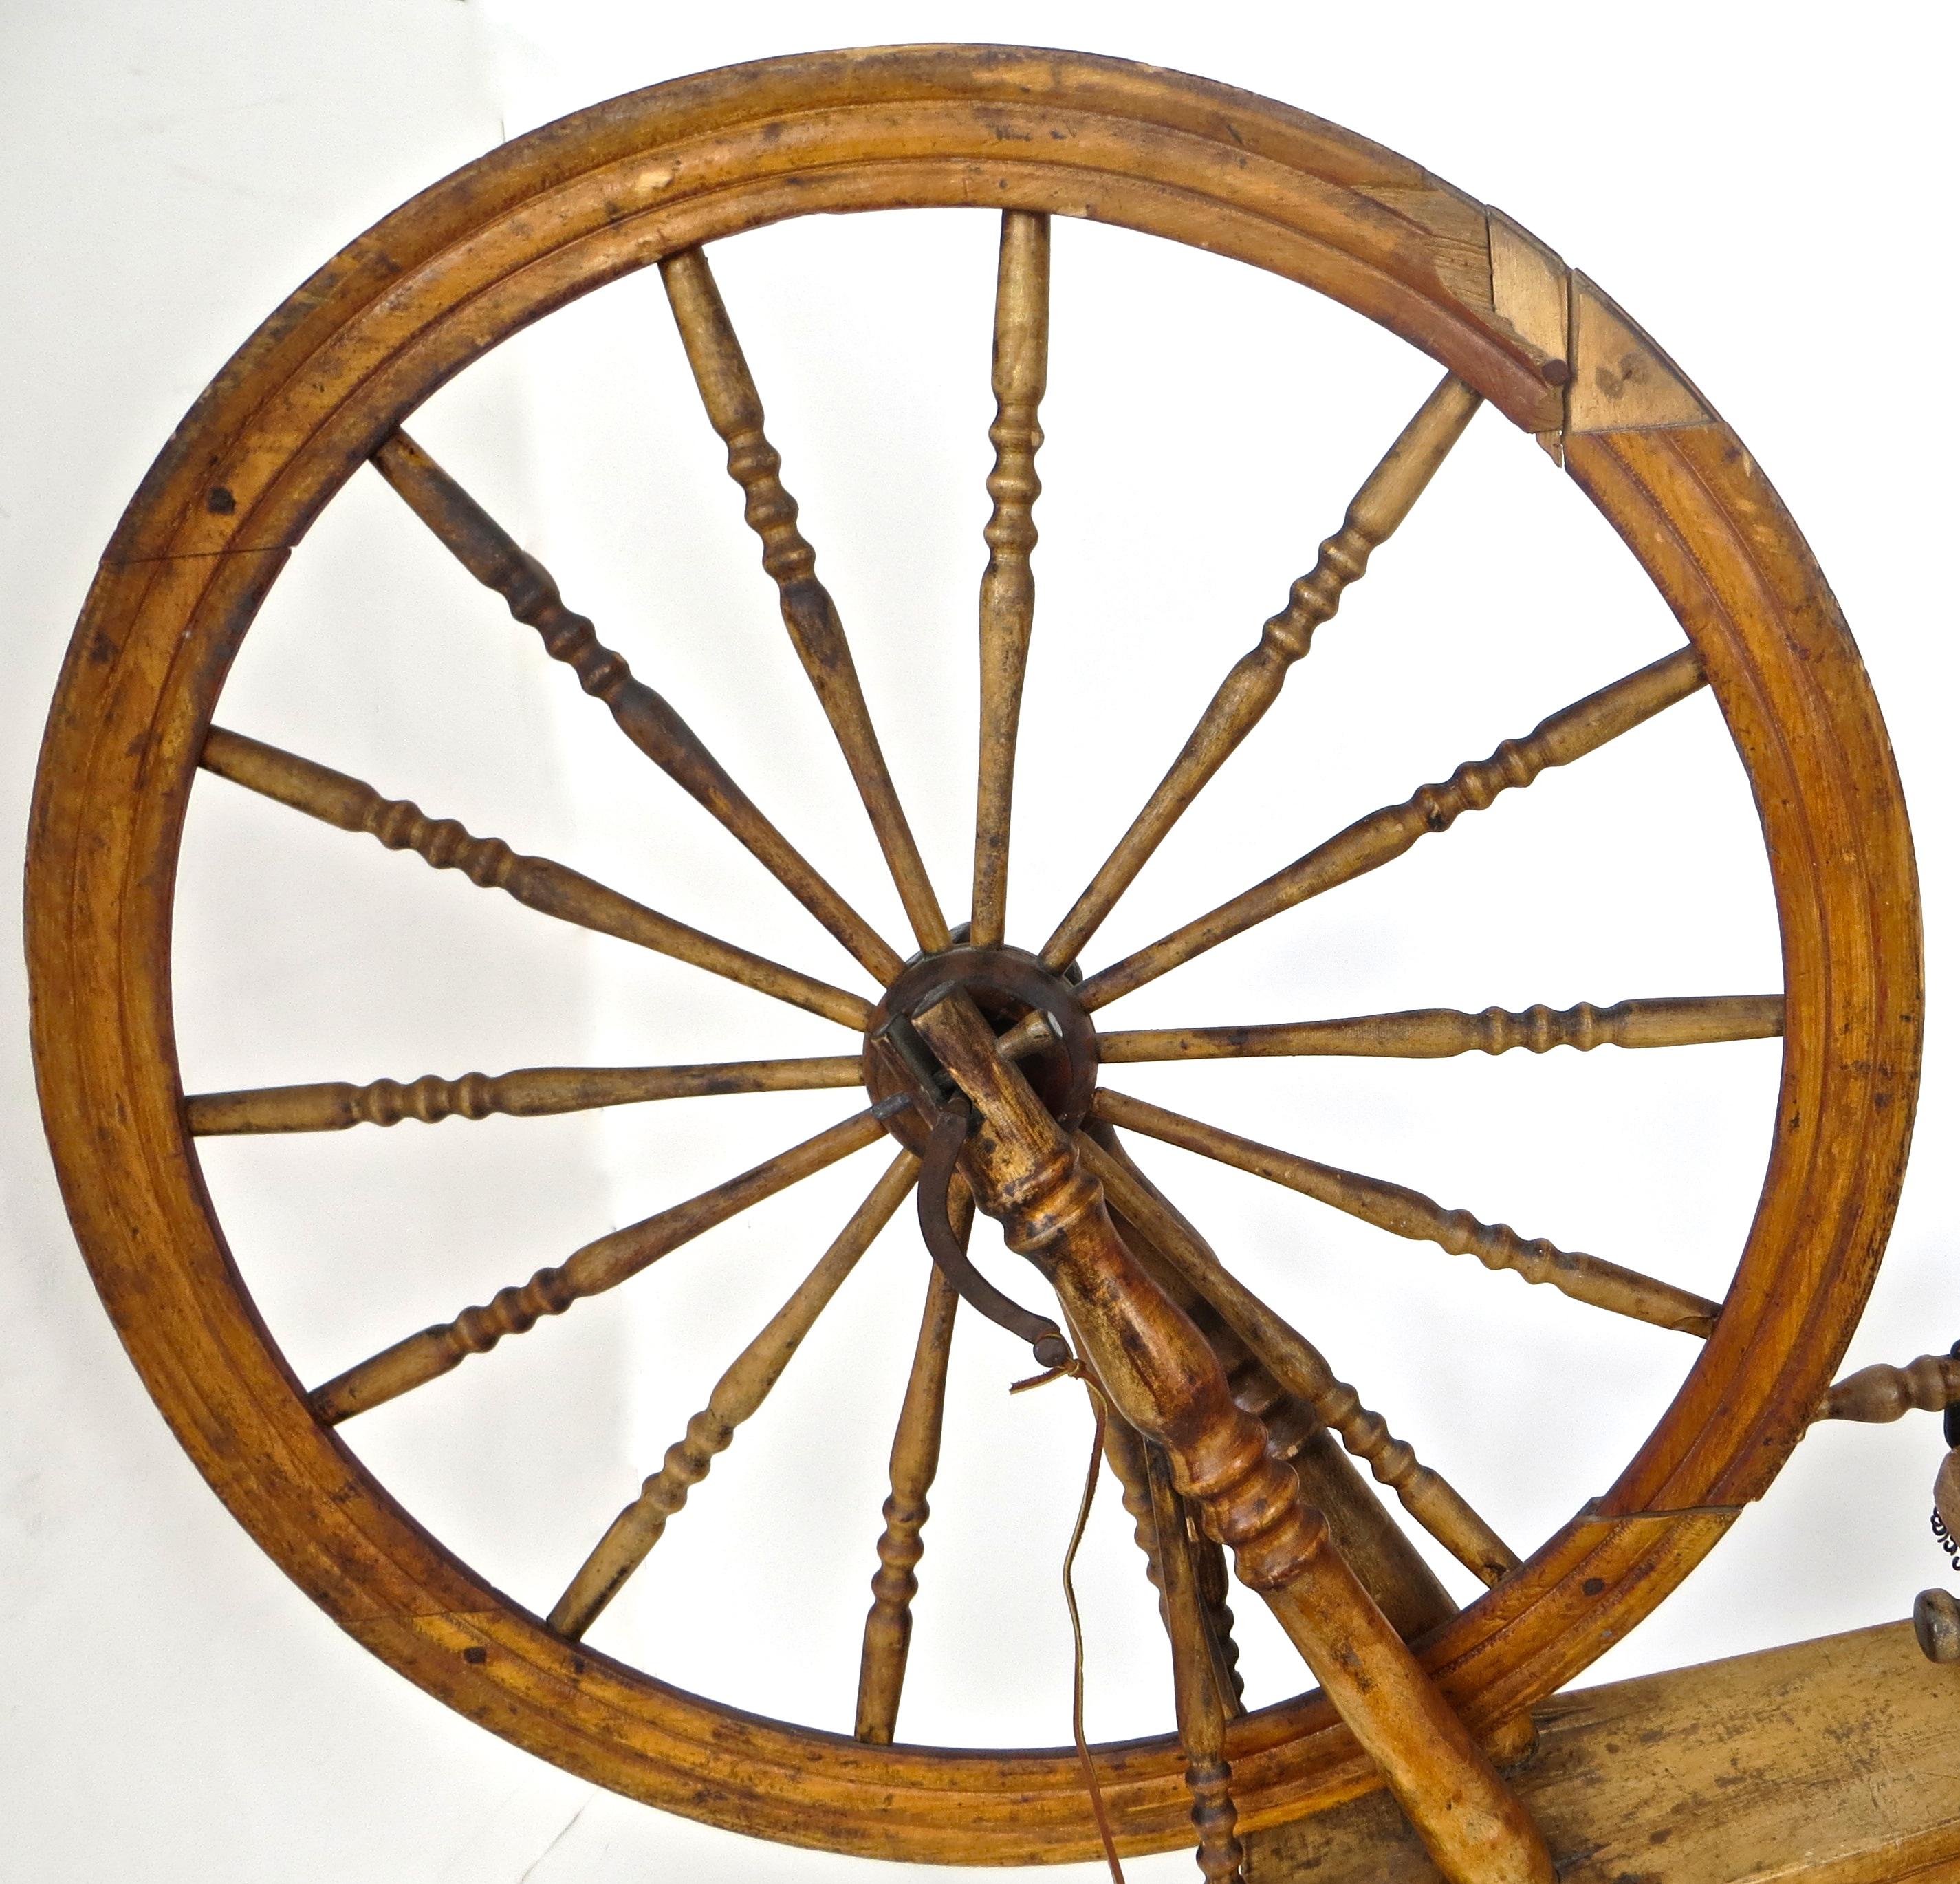 Forged Mid-19th Century American Spinning Wheel For Sale